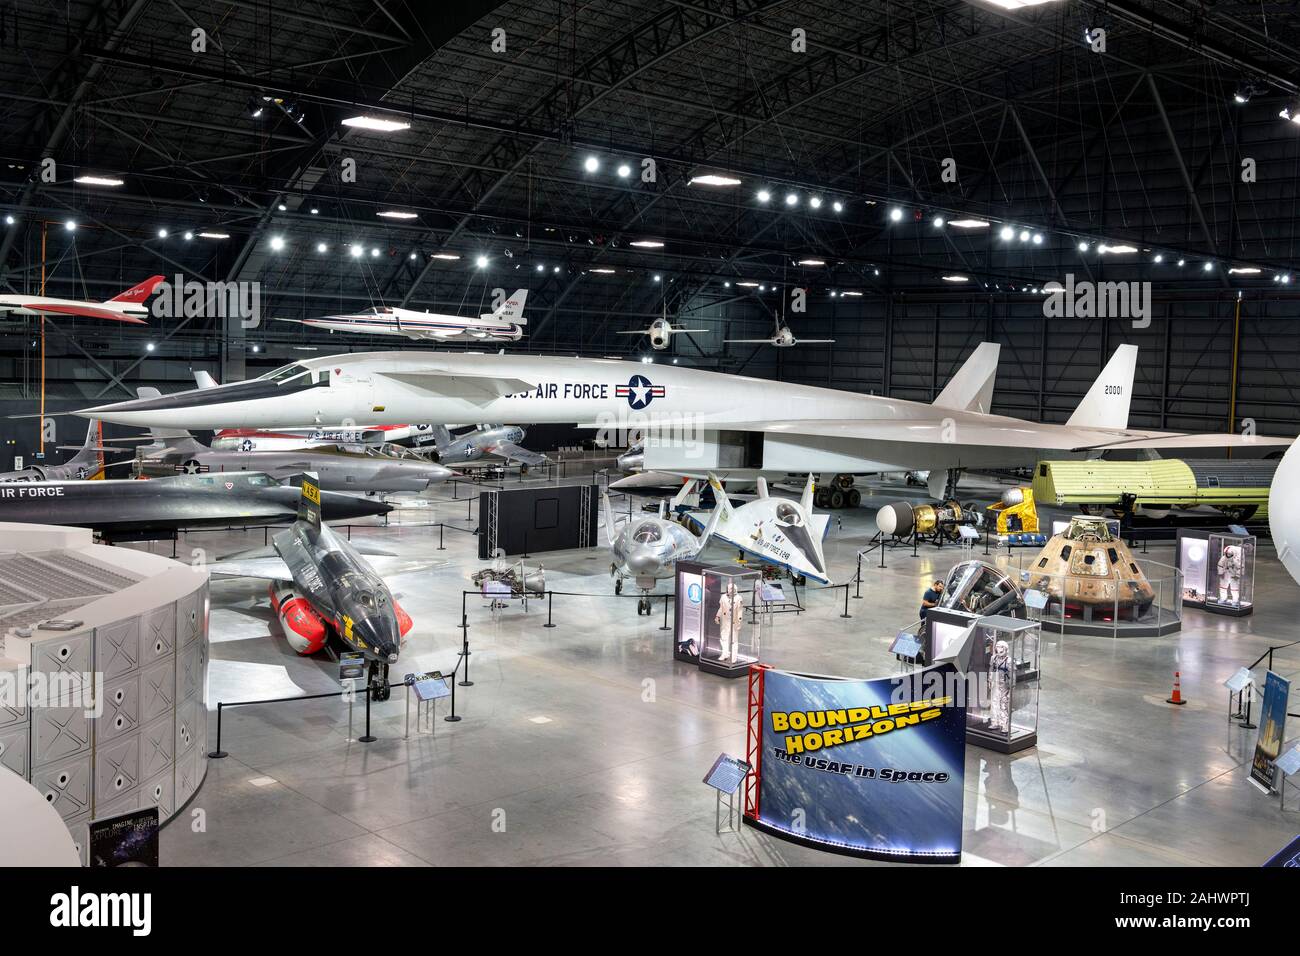 View over the Space Gallery and Research and Development Gallery at the National Museum of the United States Air Force (formerly the United States Air Force Museum), Wright-Patterson Air Force Base, Dayton, Ohio, USA. The airplane in the centre of the shot is the experimental XB-70A Valkyrie Stock Photo